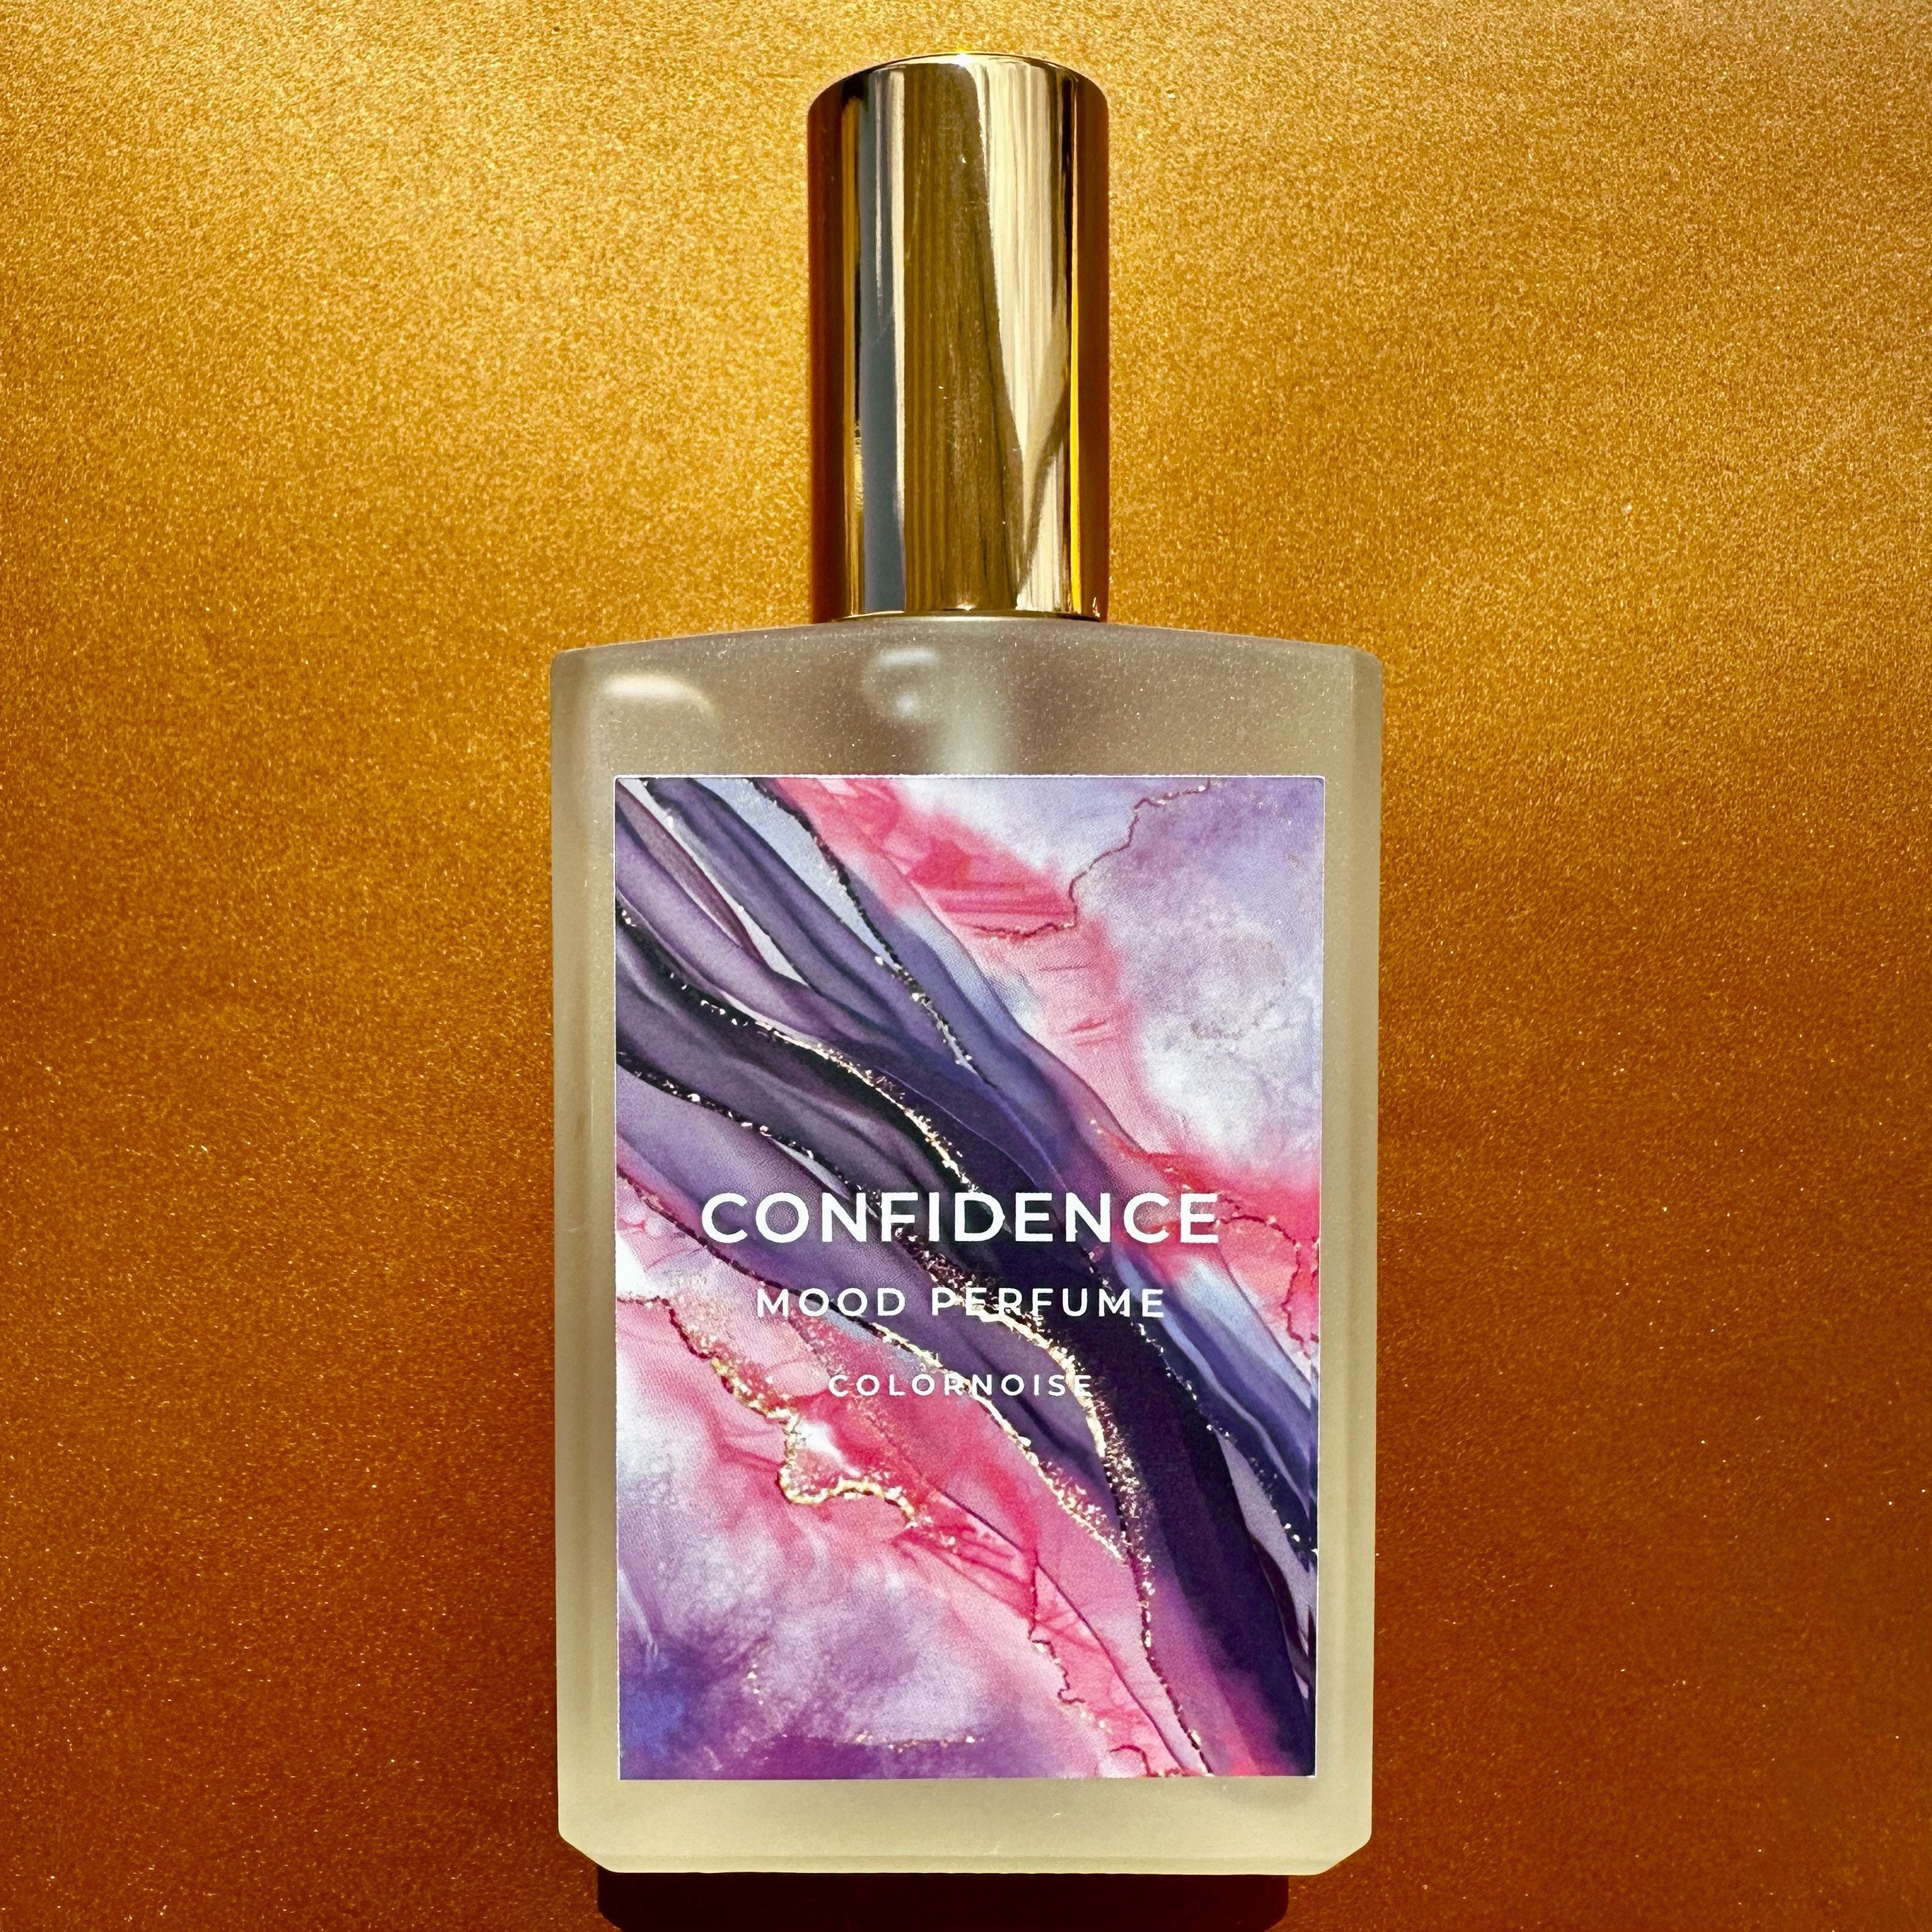 Aphrodisiac Cologne Pheromone Attract Women Really Works Great Smell  Authentic